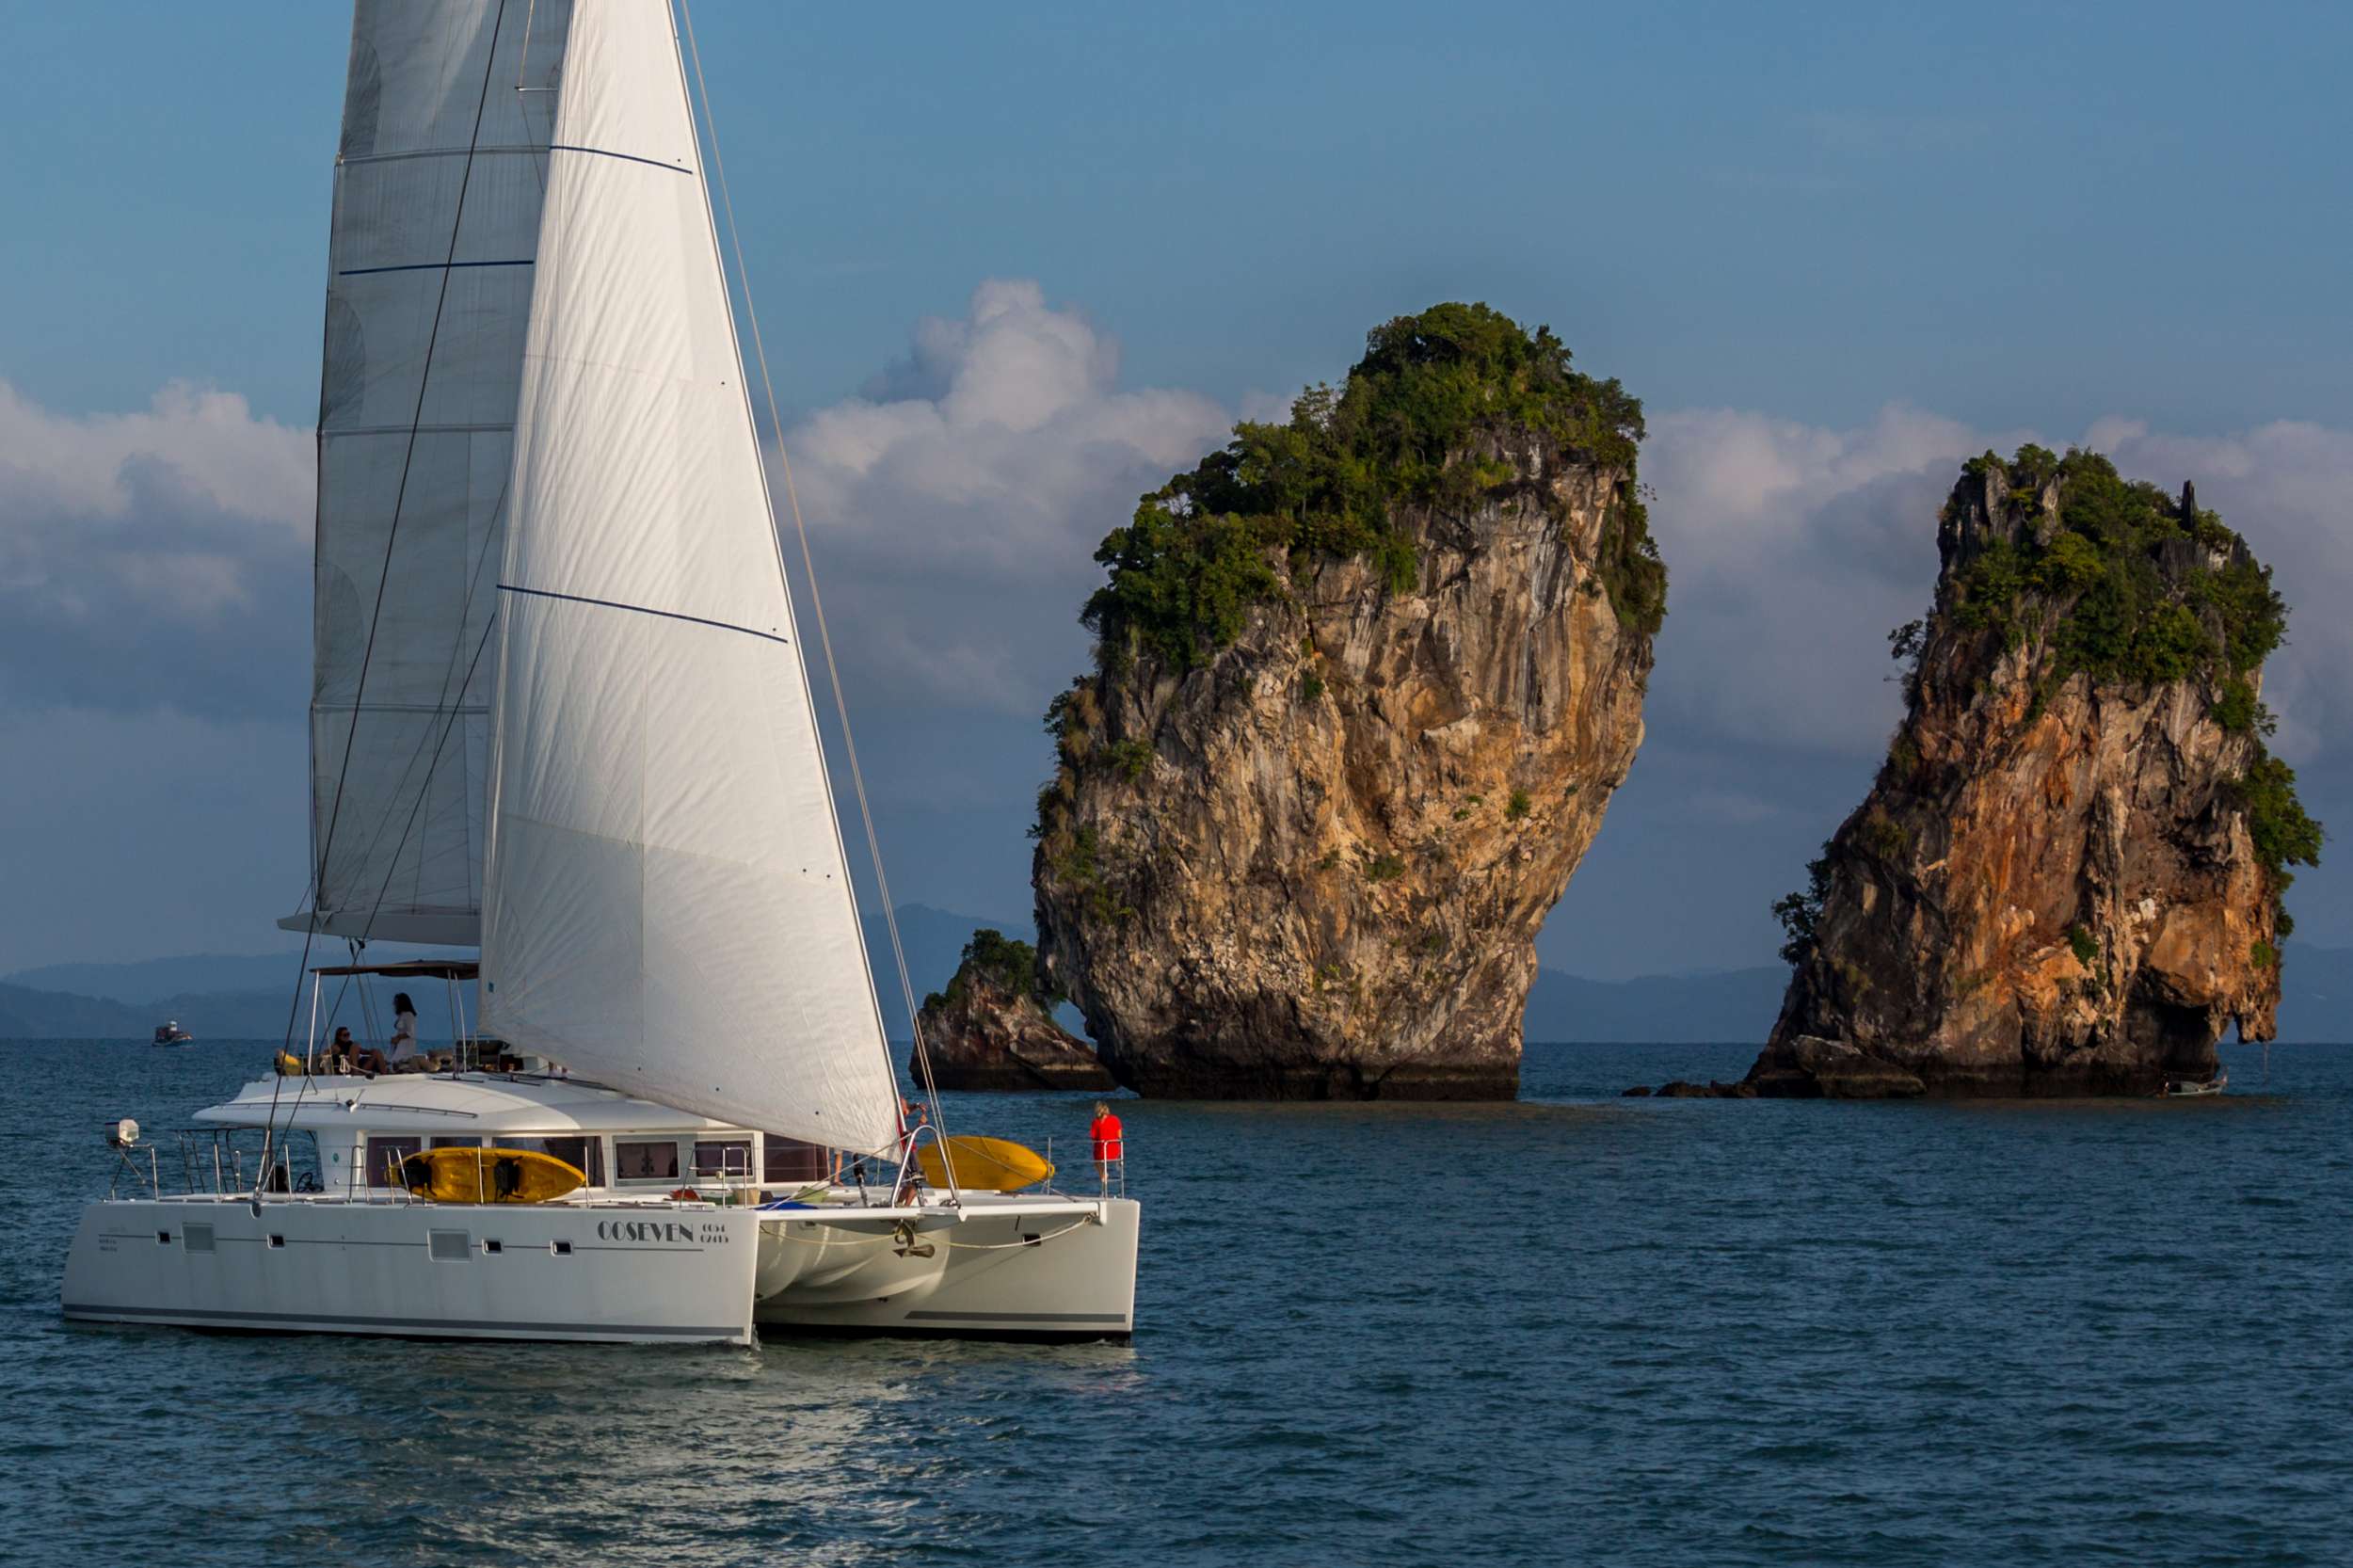 00SEVEN - Luxury yacht charter Thailand & Boat hire in SE Asia 1